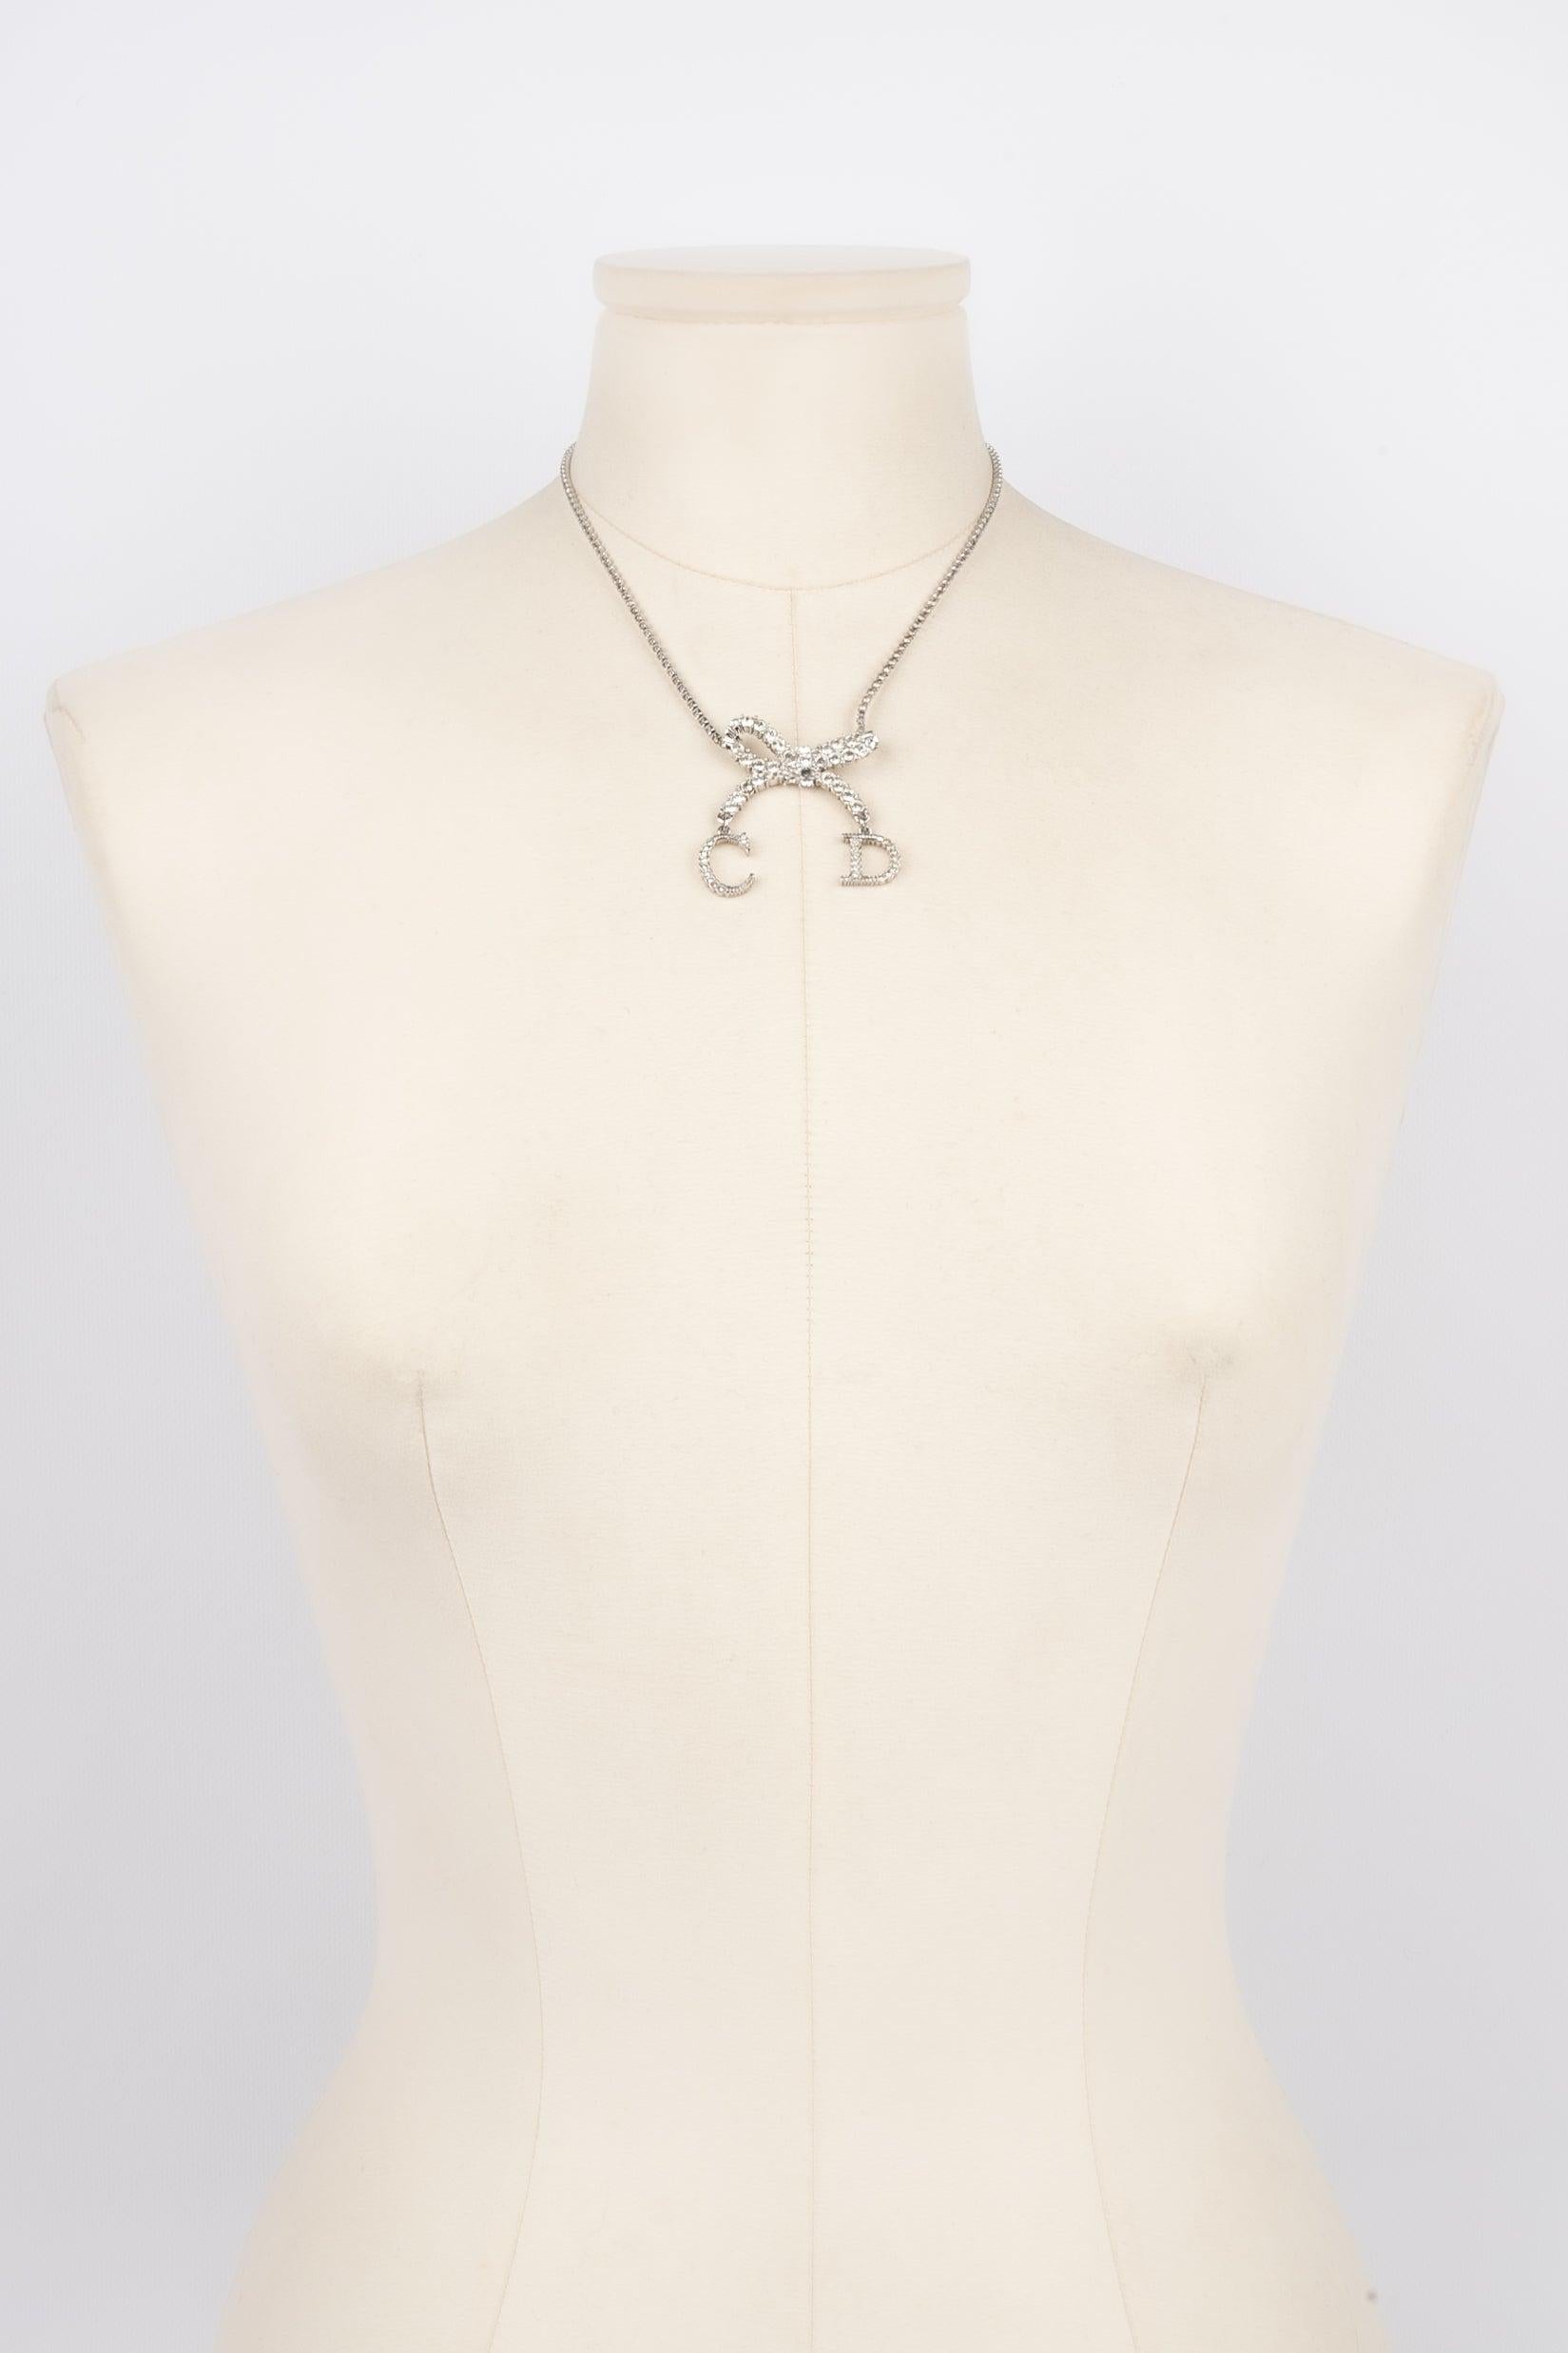 Dior - (Made in France) Silvery metal short necklace ornamented with rhinestones. Jewelry designed under the artistic direction of John Galliano.

Additional information:
Condition: Very good condition
Dimensions: Length: from 39 cm to 43 cm

Seller